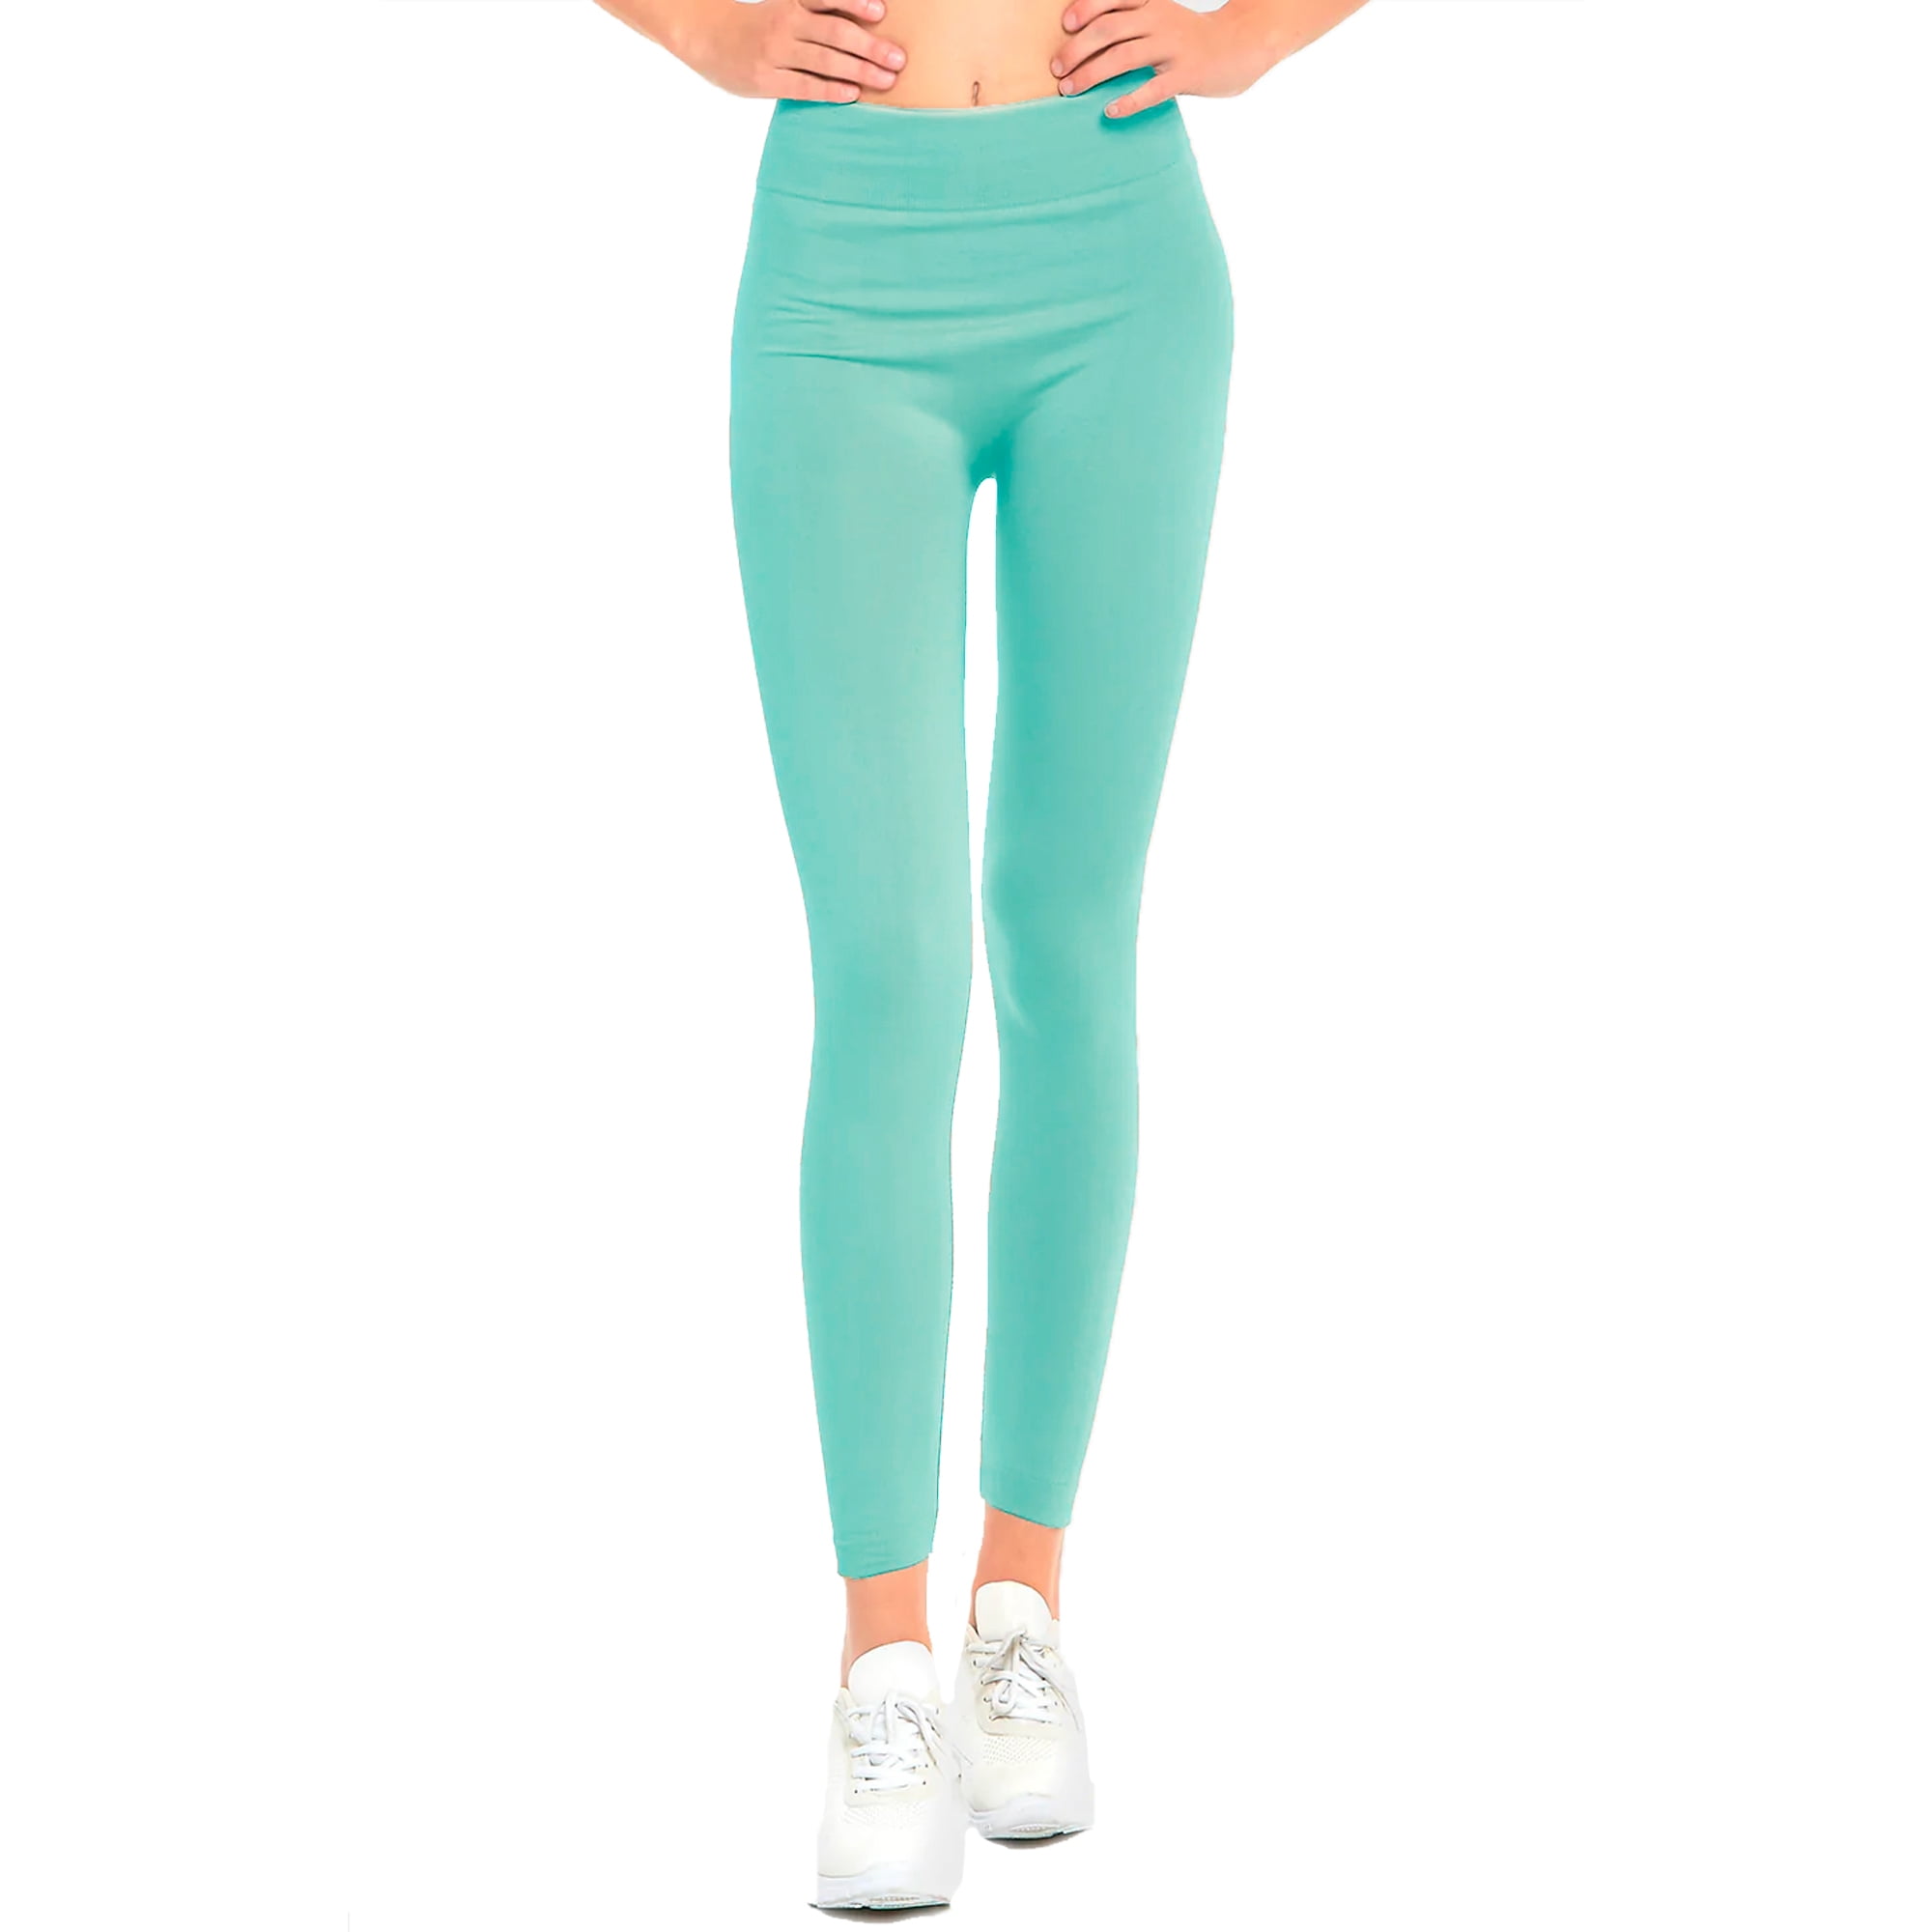 Solid color peach skin fleeced lined plus size leggings. -  (7301279)